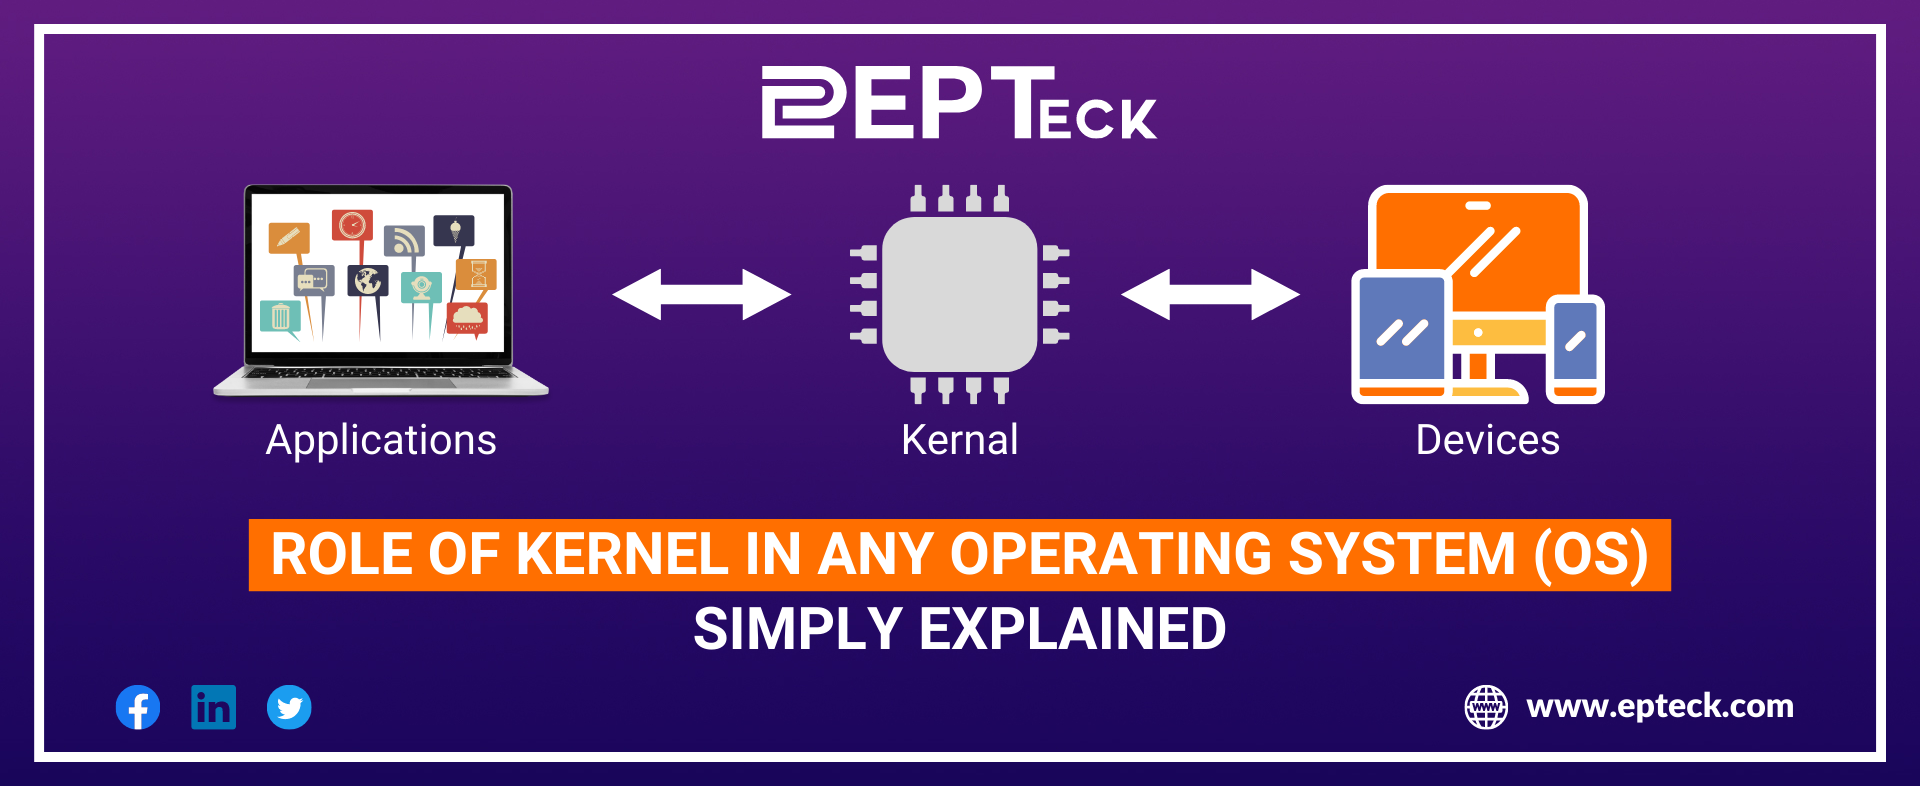 Role of Kernel in Operating System (OS): Simply Explained